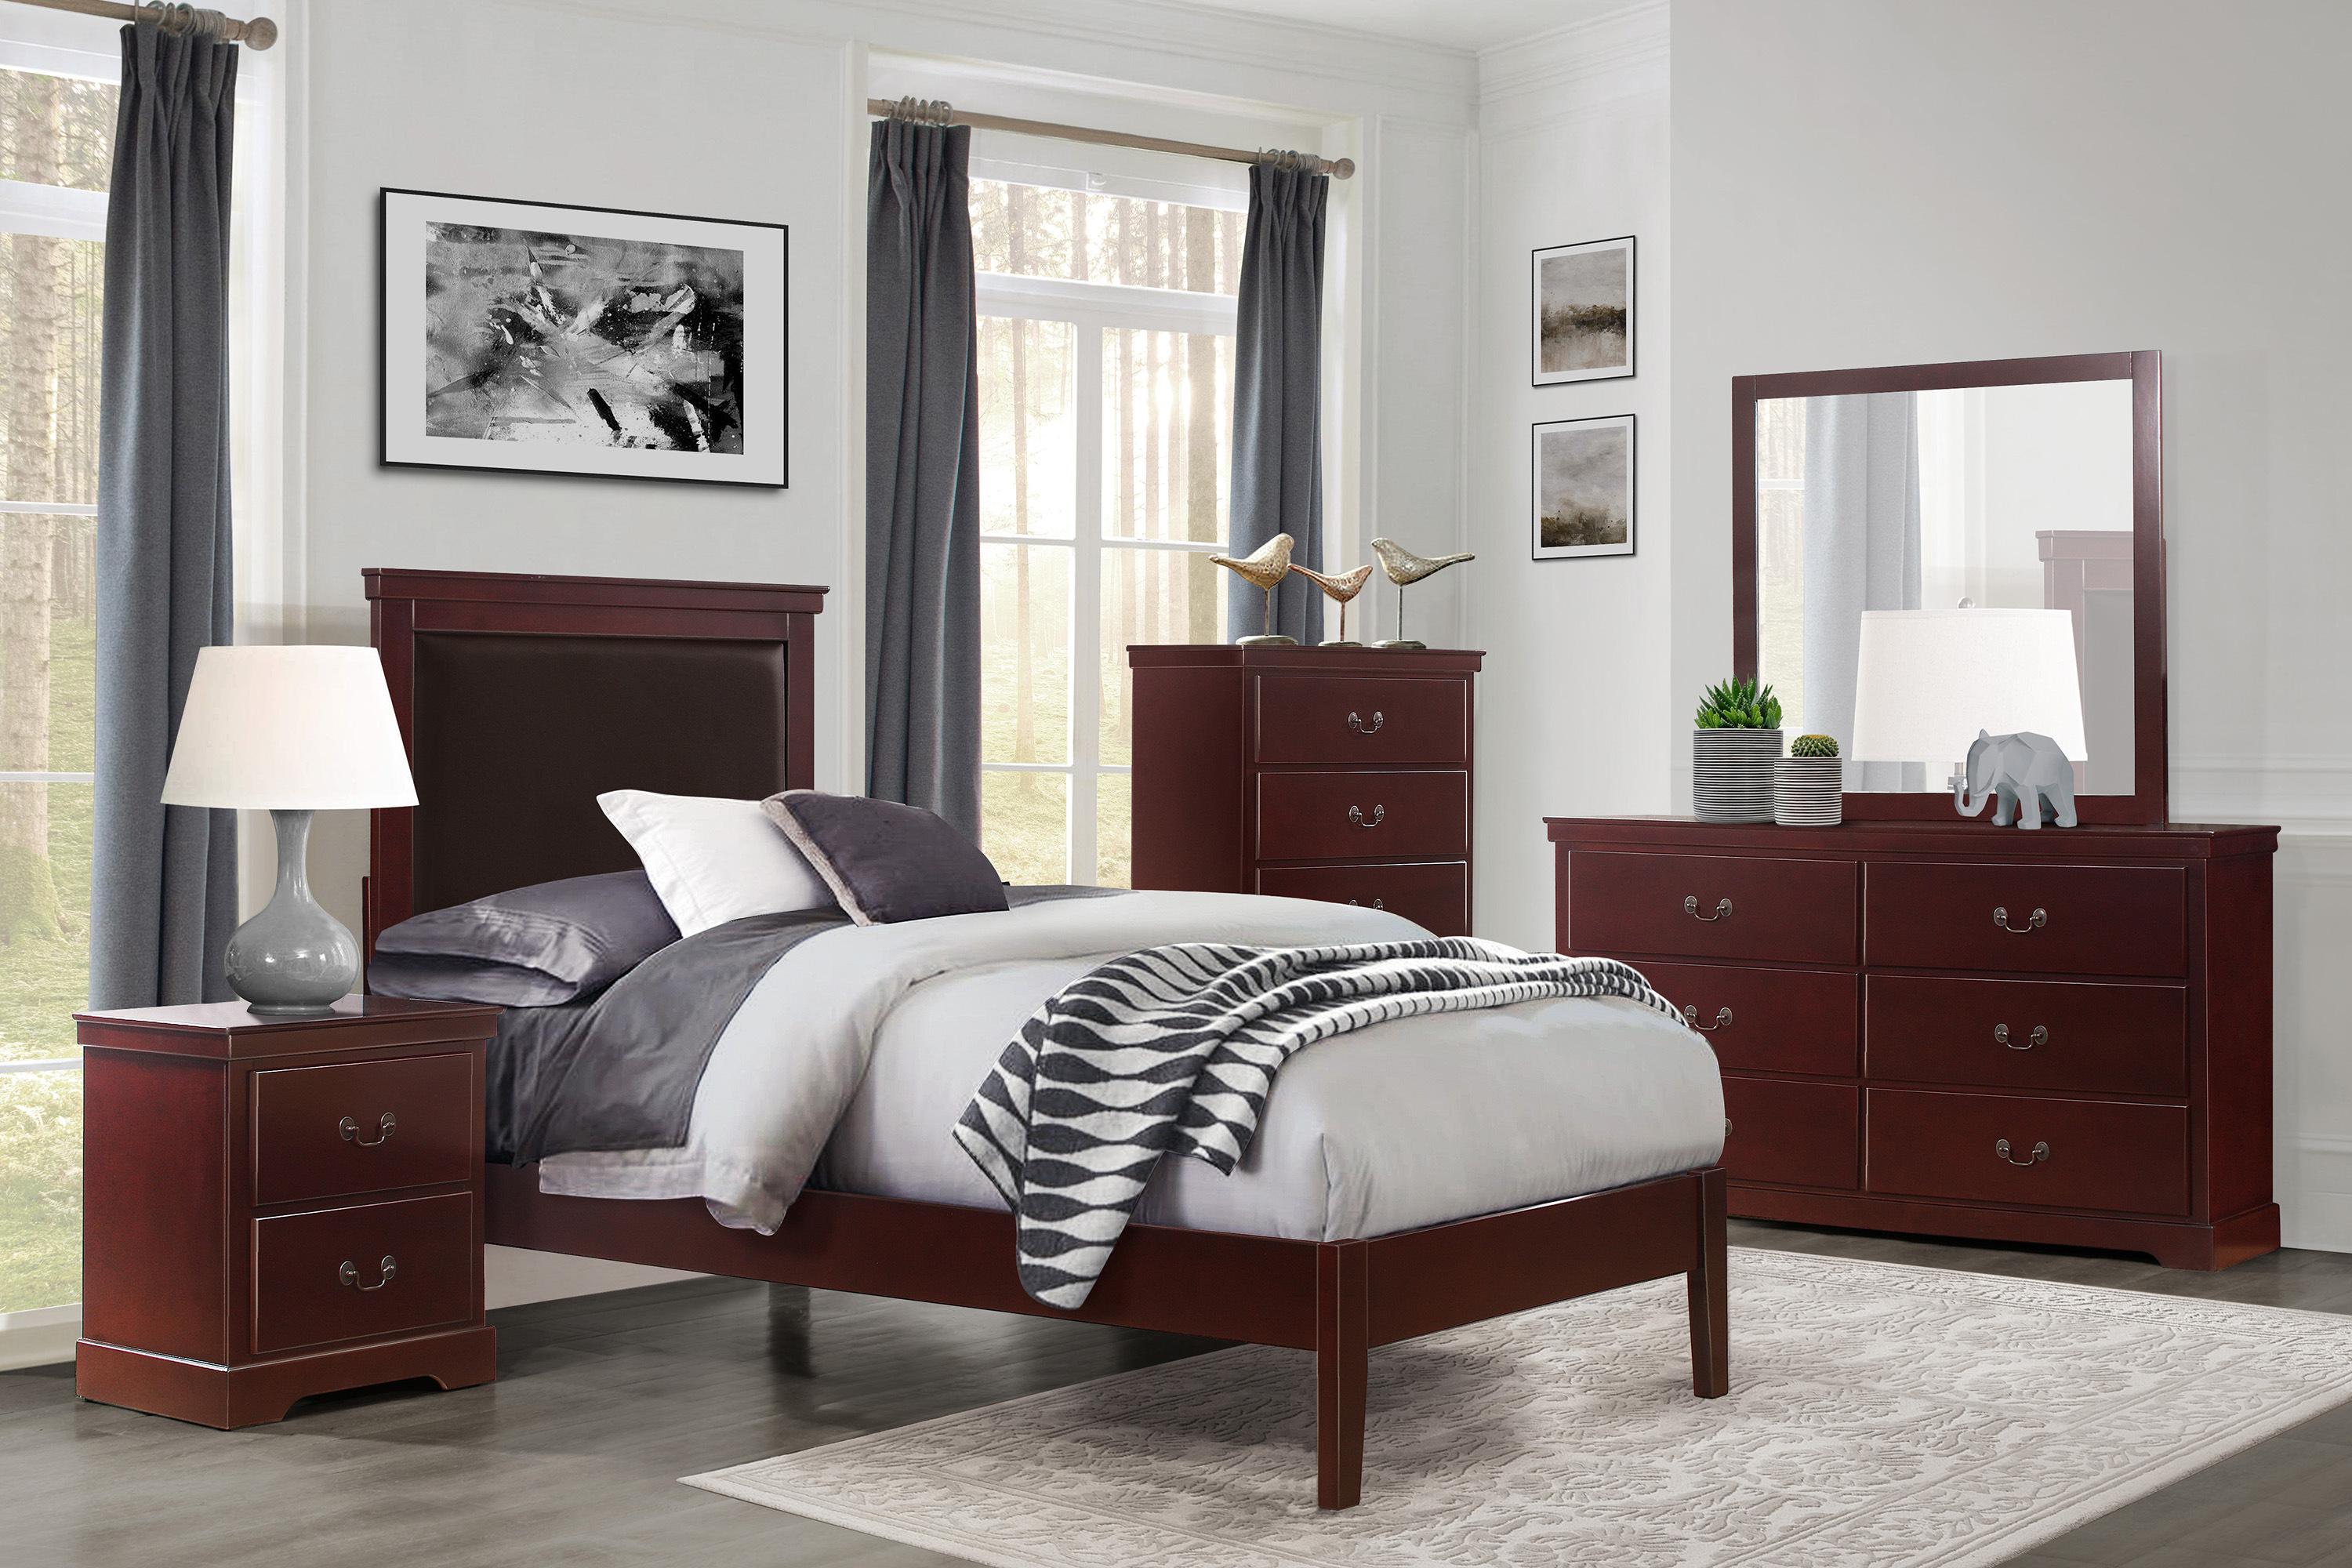 Modern Bedroom Set 1519CHT-1-5PC Seabright 1519CHT-1-5PC in Cherry Faux Leather